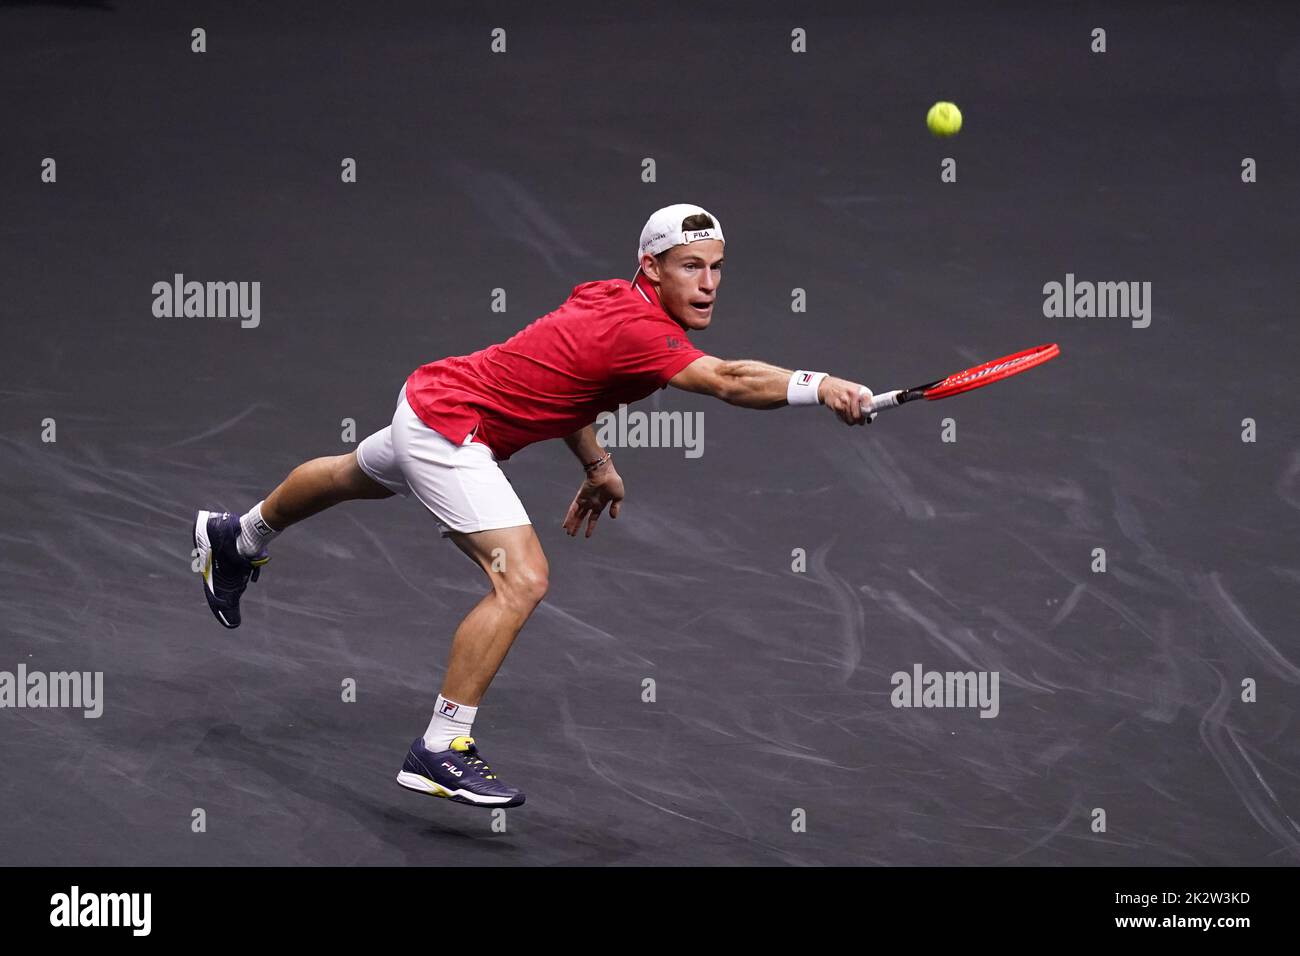 Team World's Diego Schwartzman in action against Team Europe's Stefanos Tsitsipas (not pictured) on day one of the Laver Cup at the O2 Arena, London. Picture date: Friday September 23, 2022. Stock Photo